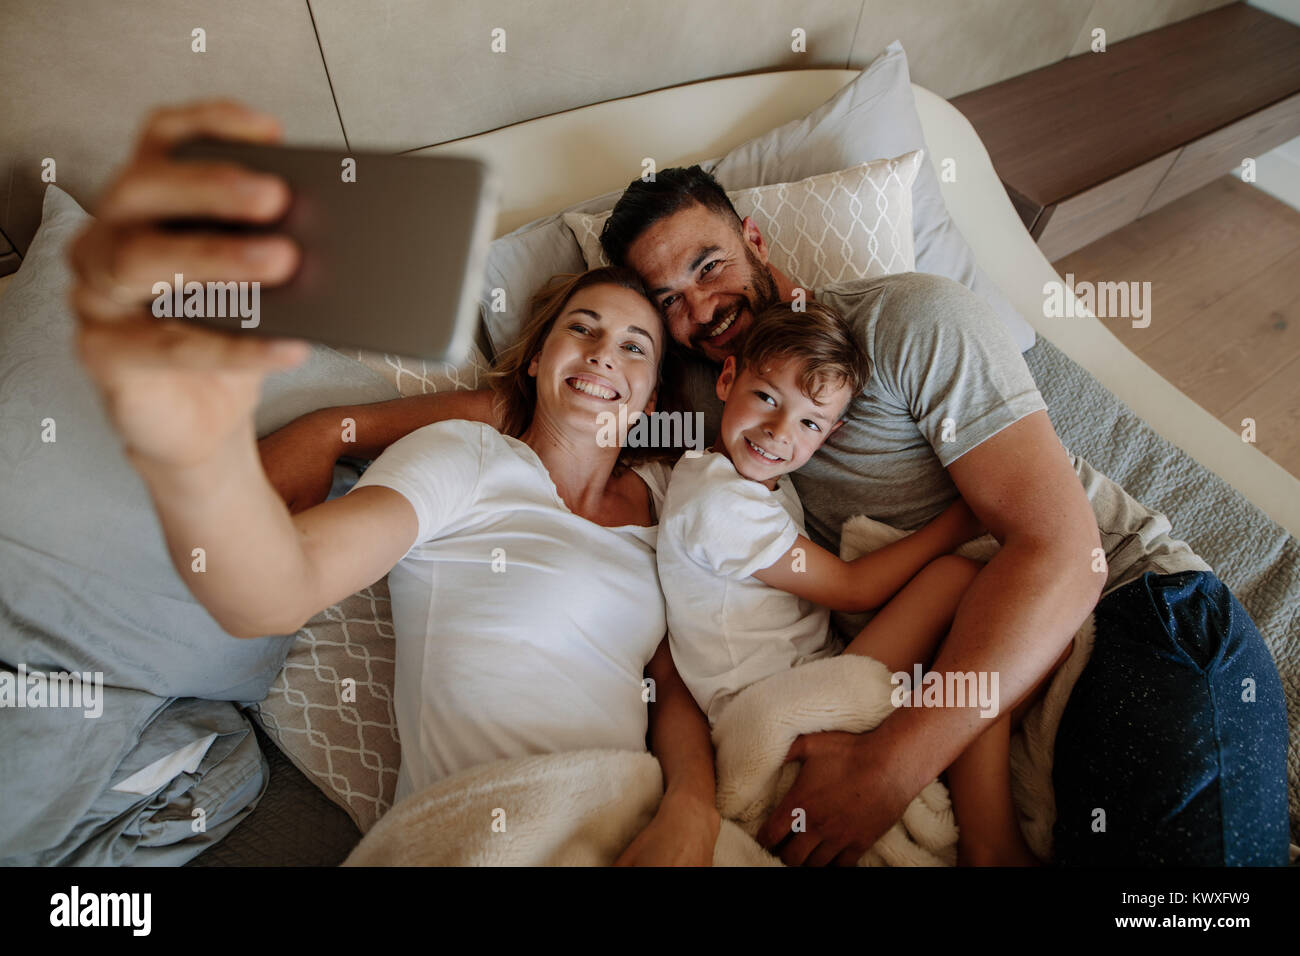 Happy young woman taking selfie with her family. Family lying on bed and taking selfie at home. Stock Photo